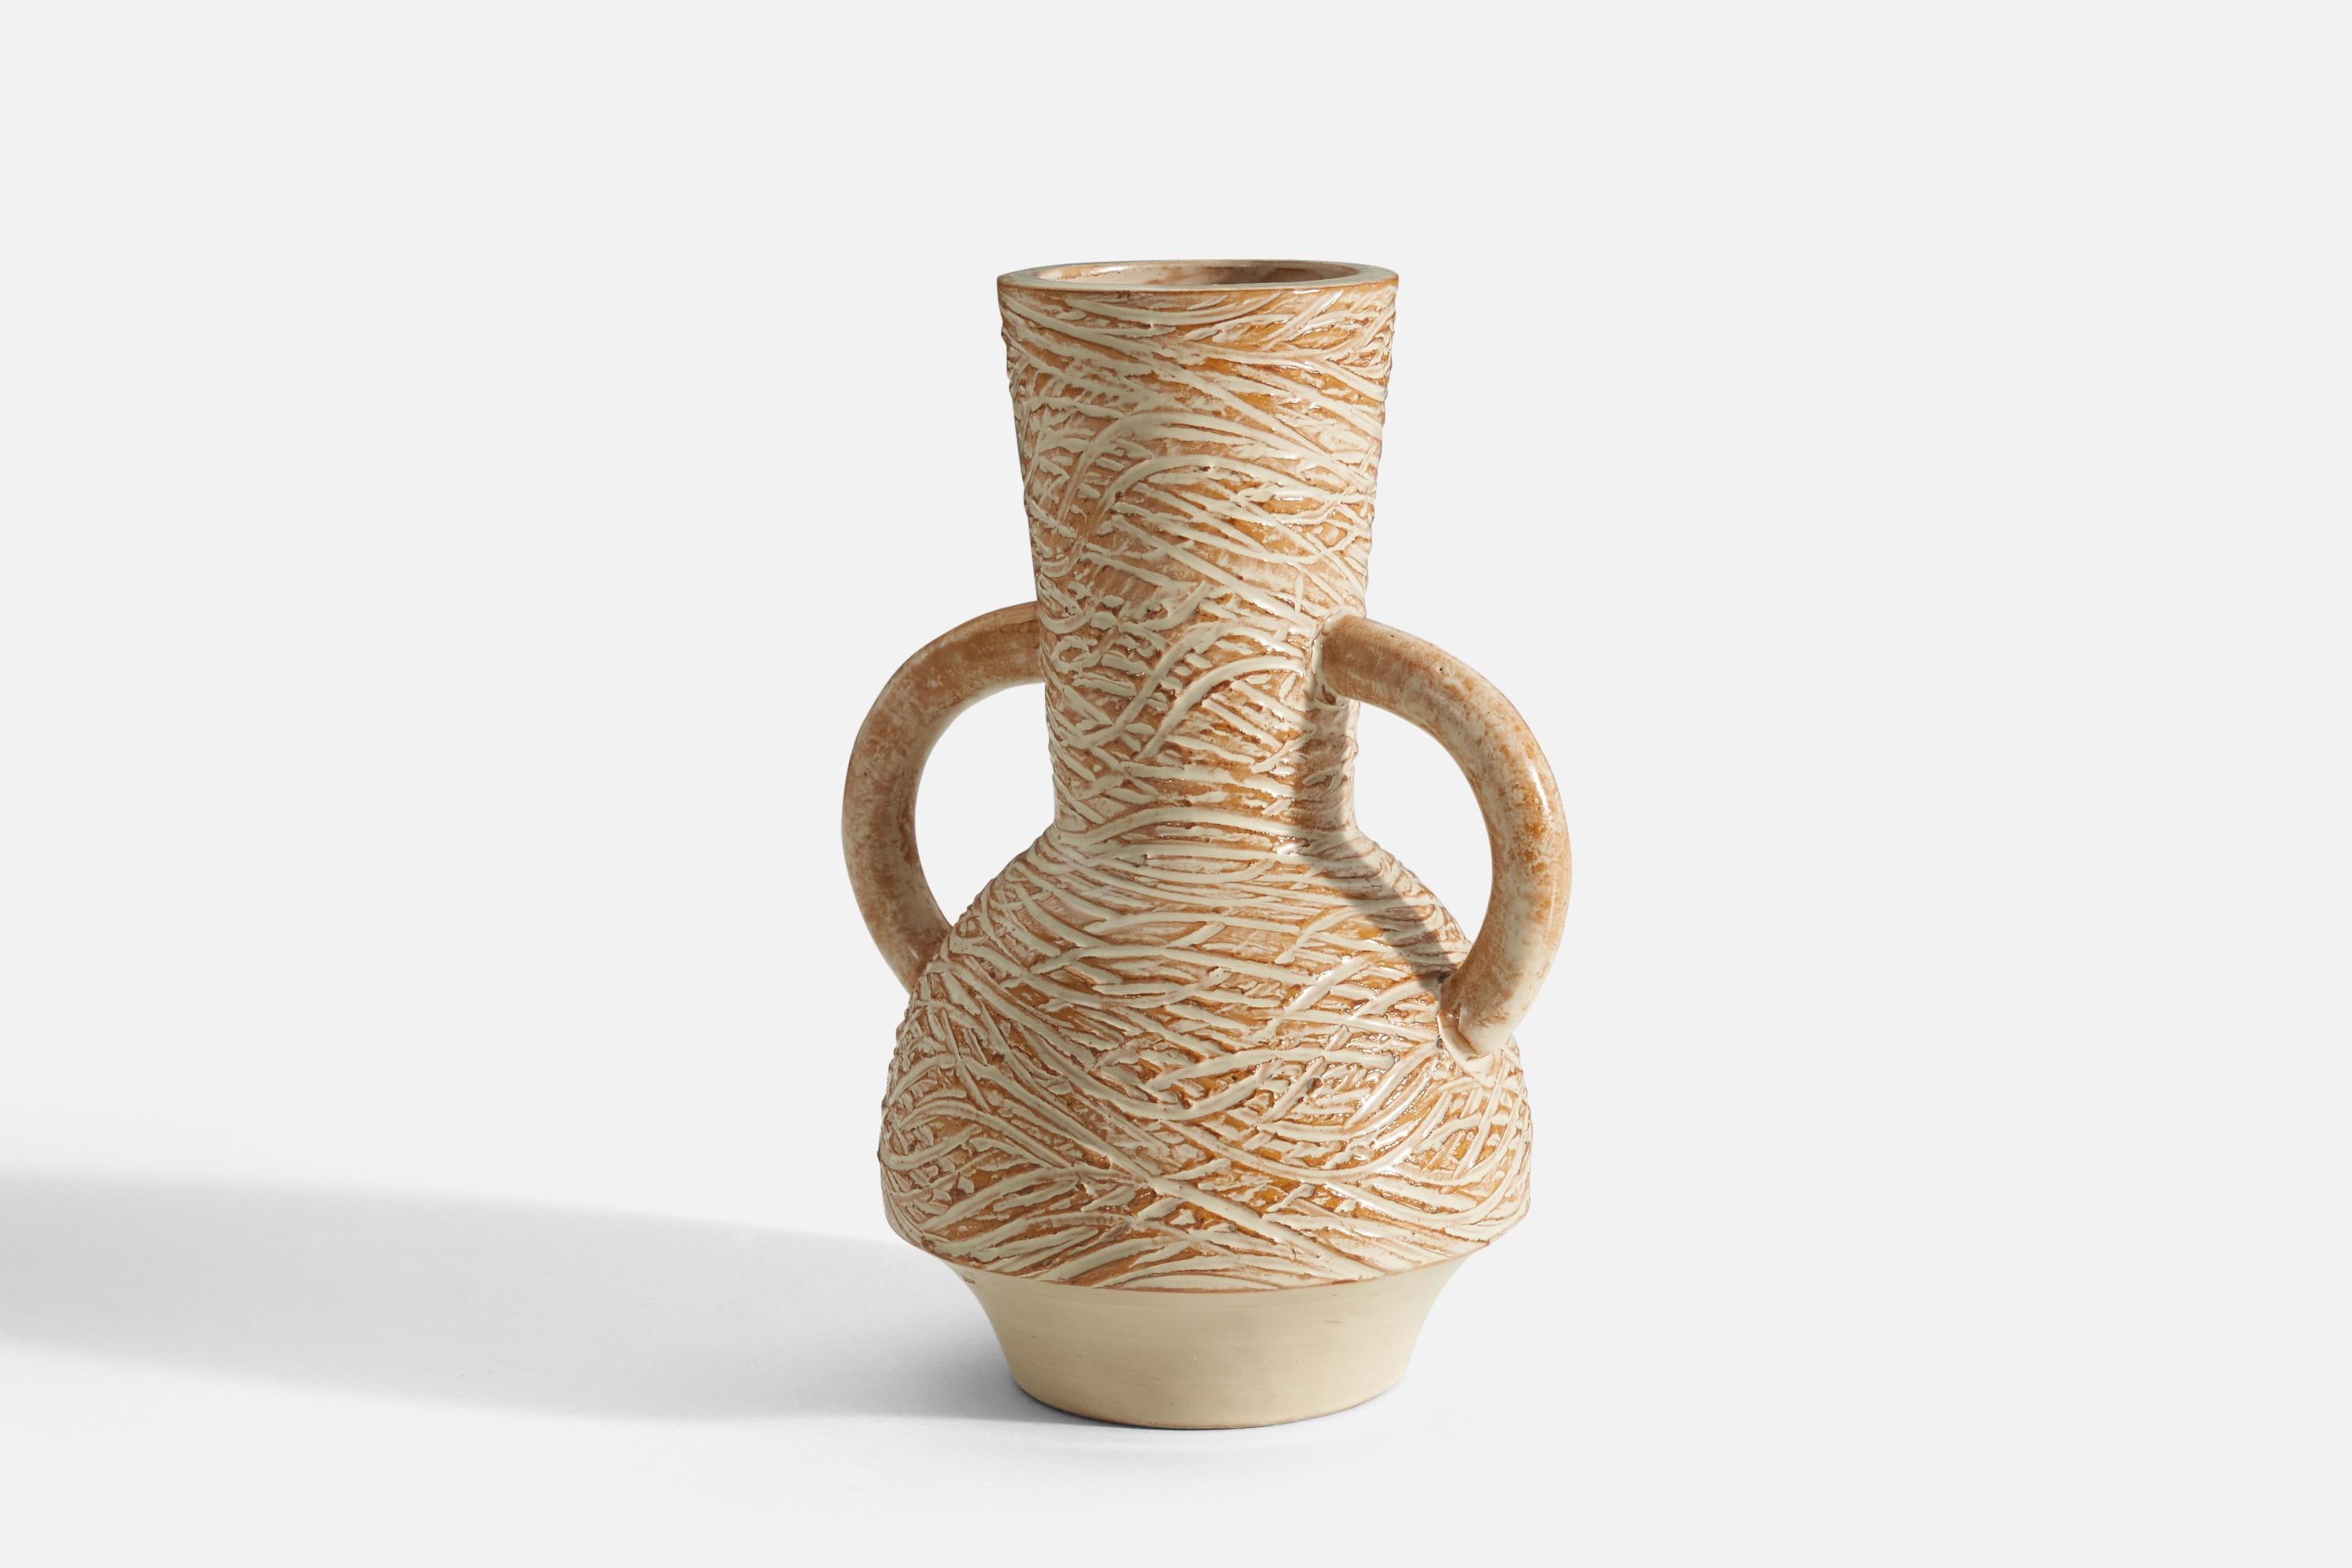 An orange and cream colored vase designed and produced by Andersson & Johansson, Sweden, c. 1940s. This vase features an incised linear and abstract motif along with classically proportioned handles.